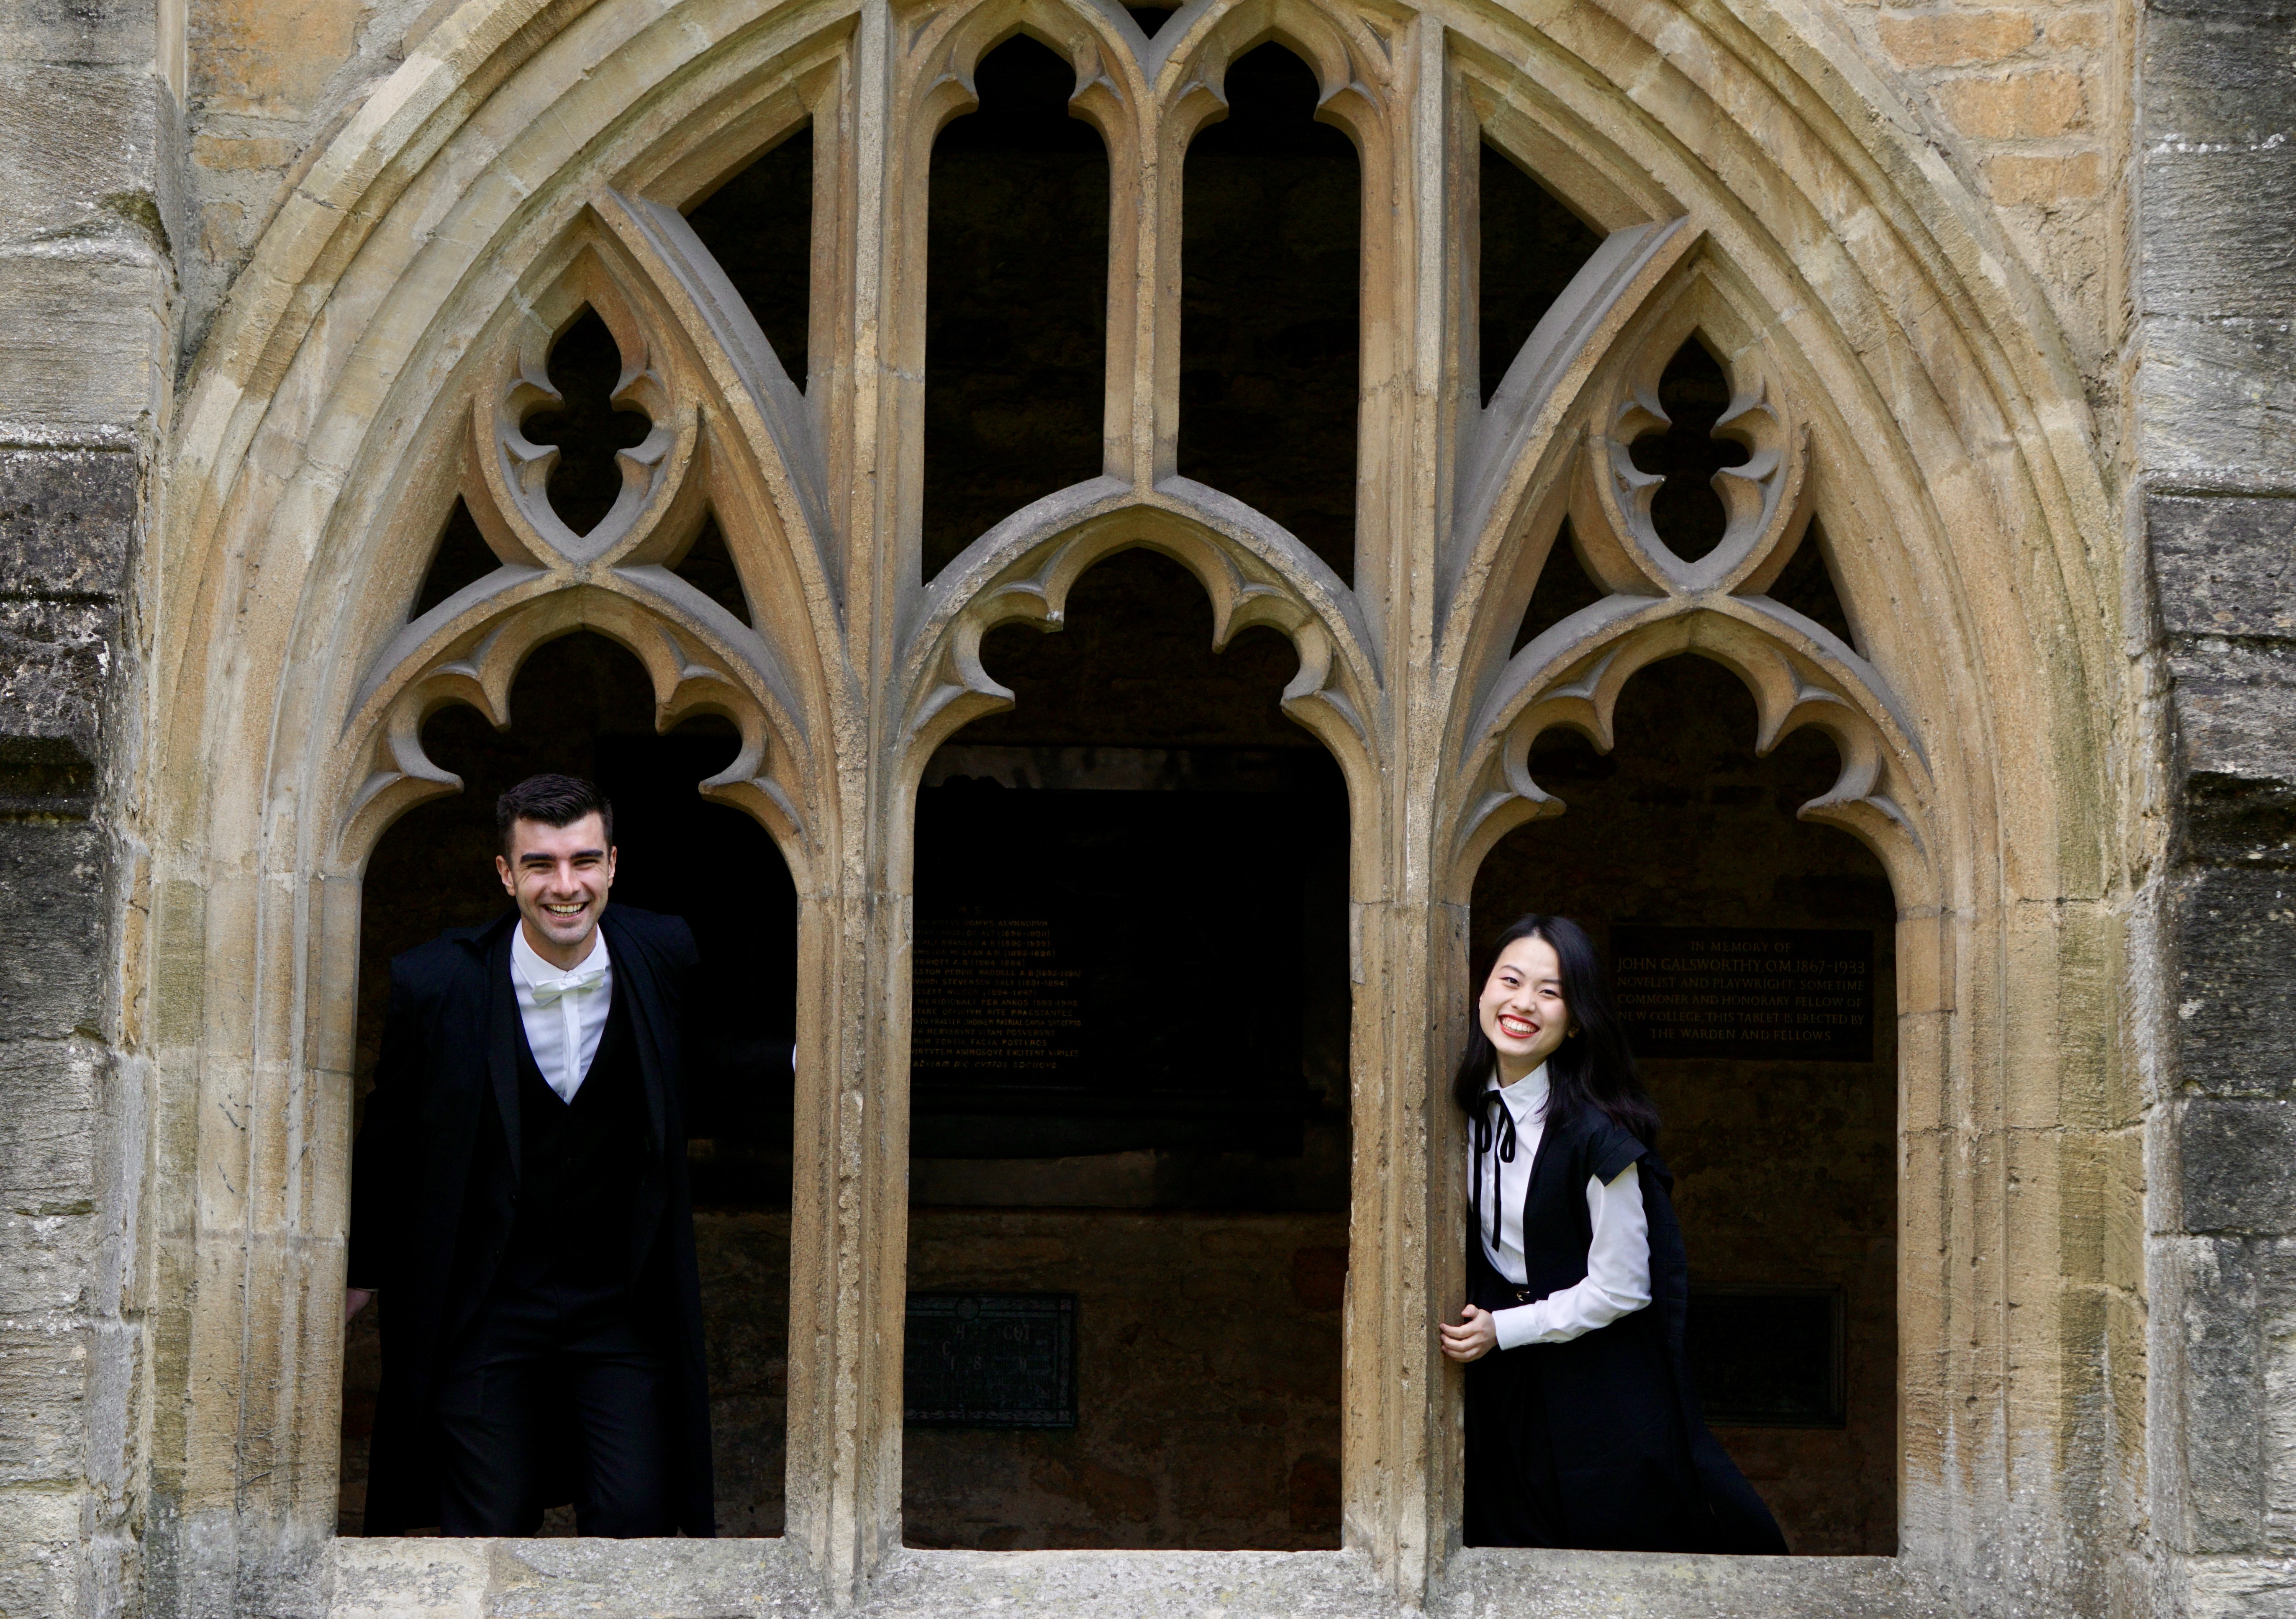 Two students in sub fusc, socially distanced in the Cloisters